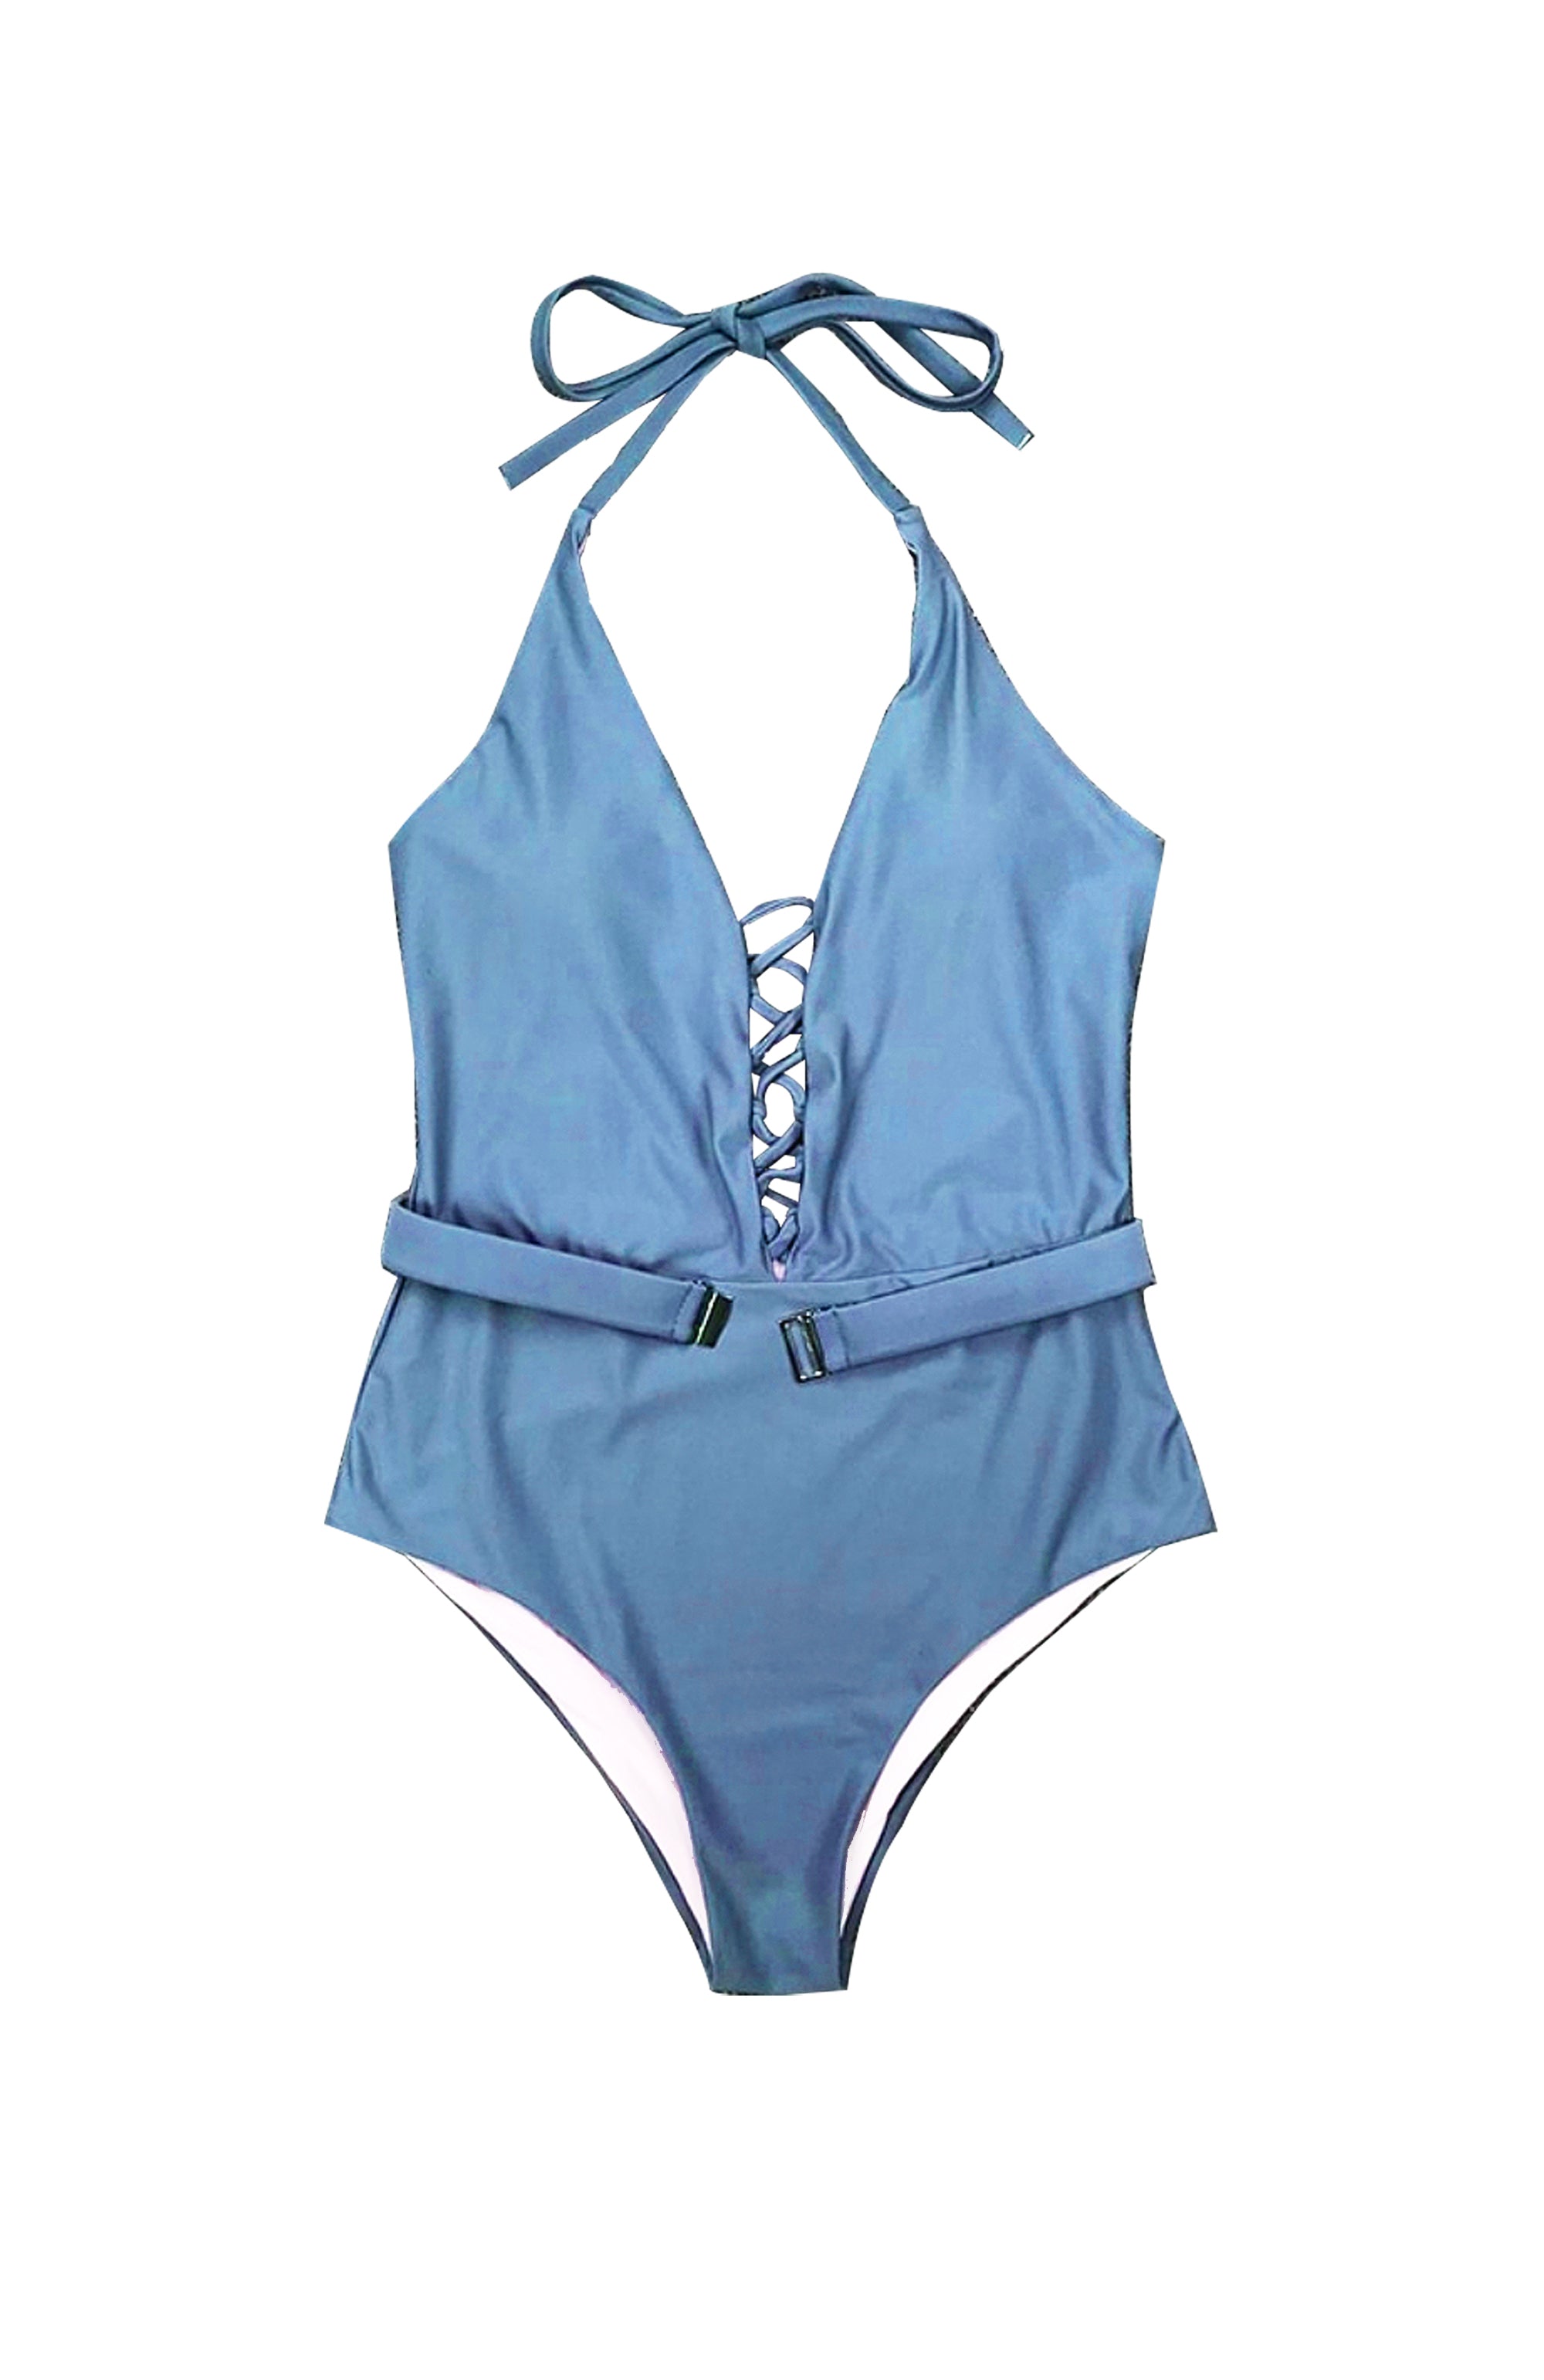 Kindred Spirit Blue One Piece Swimsuit